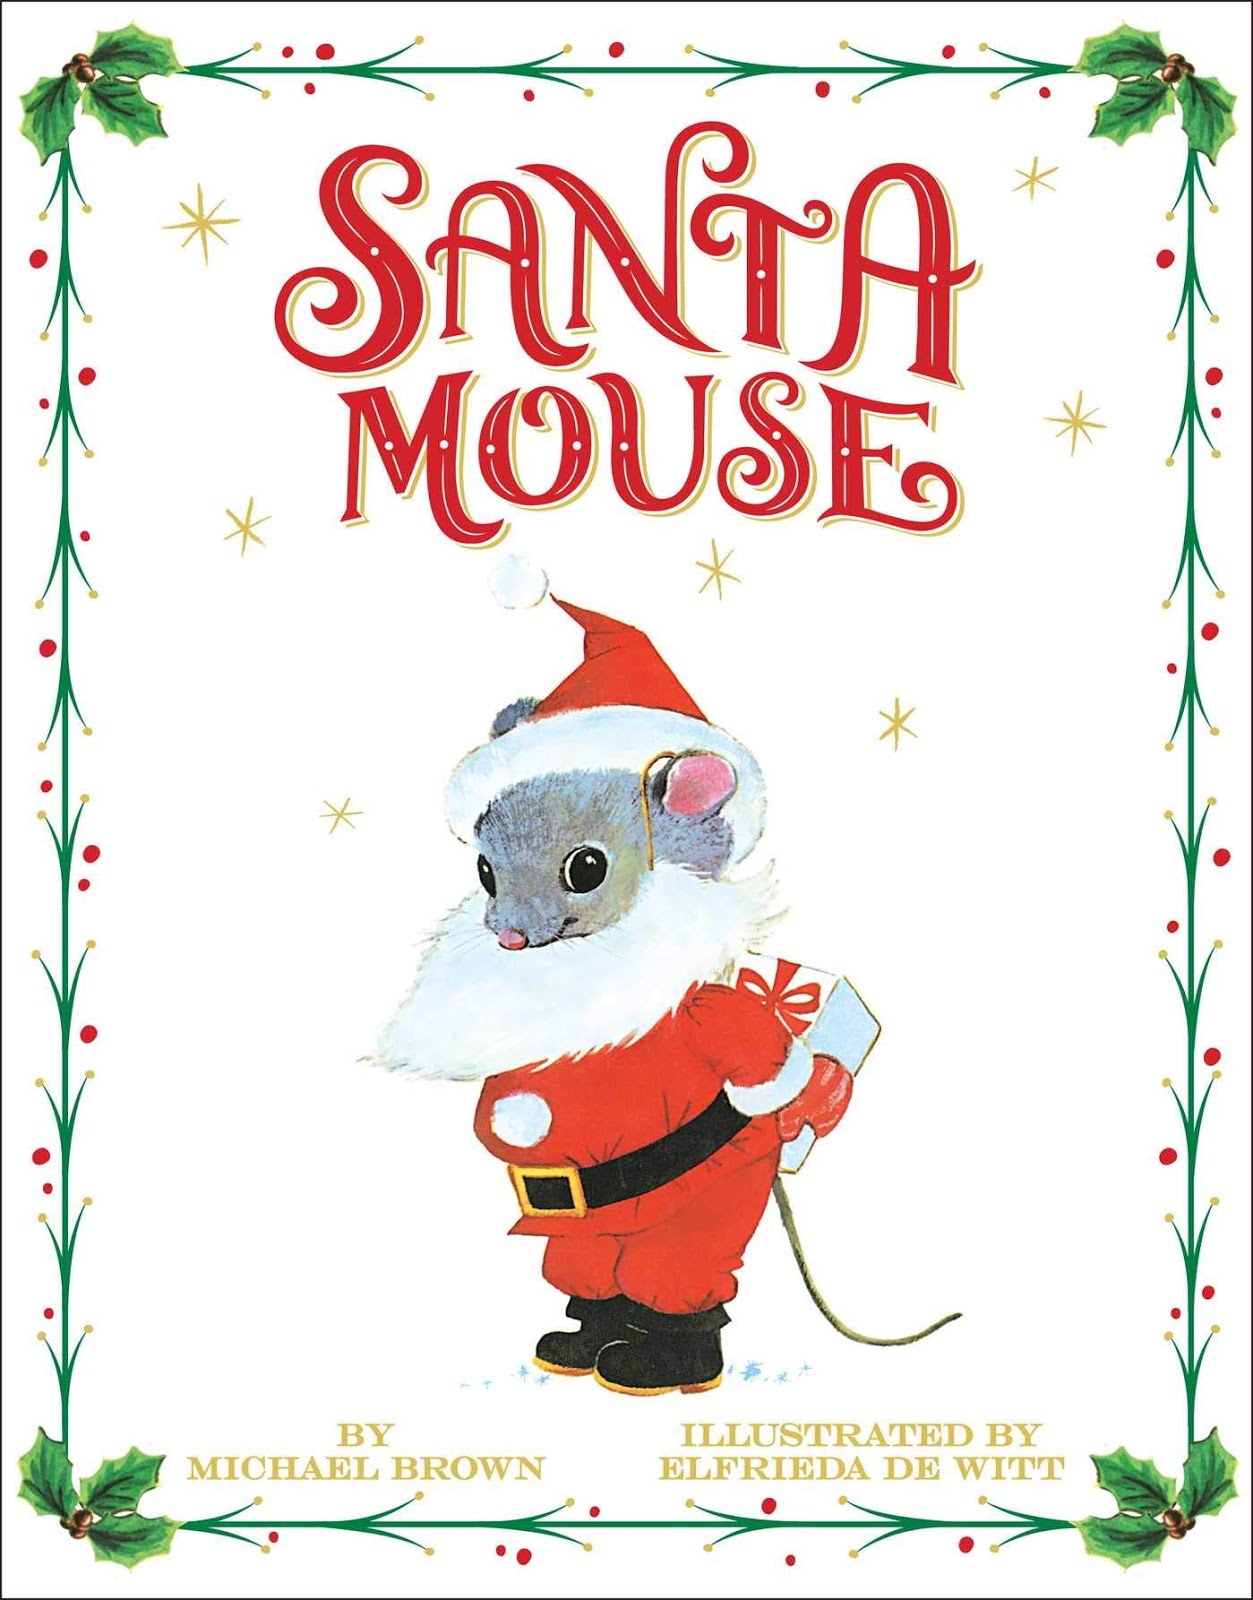 Santa Mouse, a holiday favorite by Michael Brown.